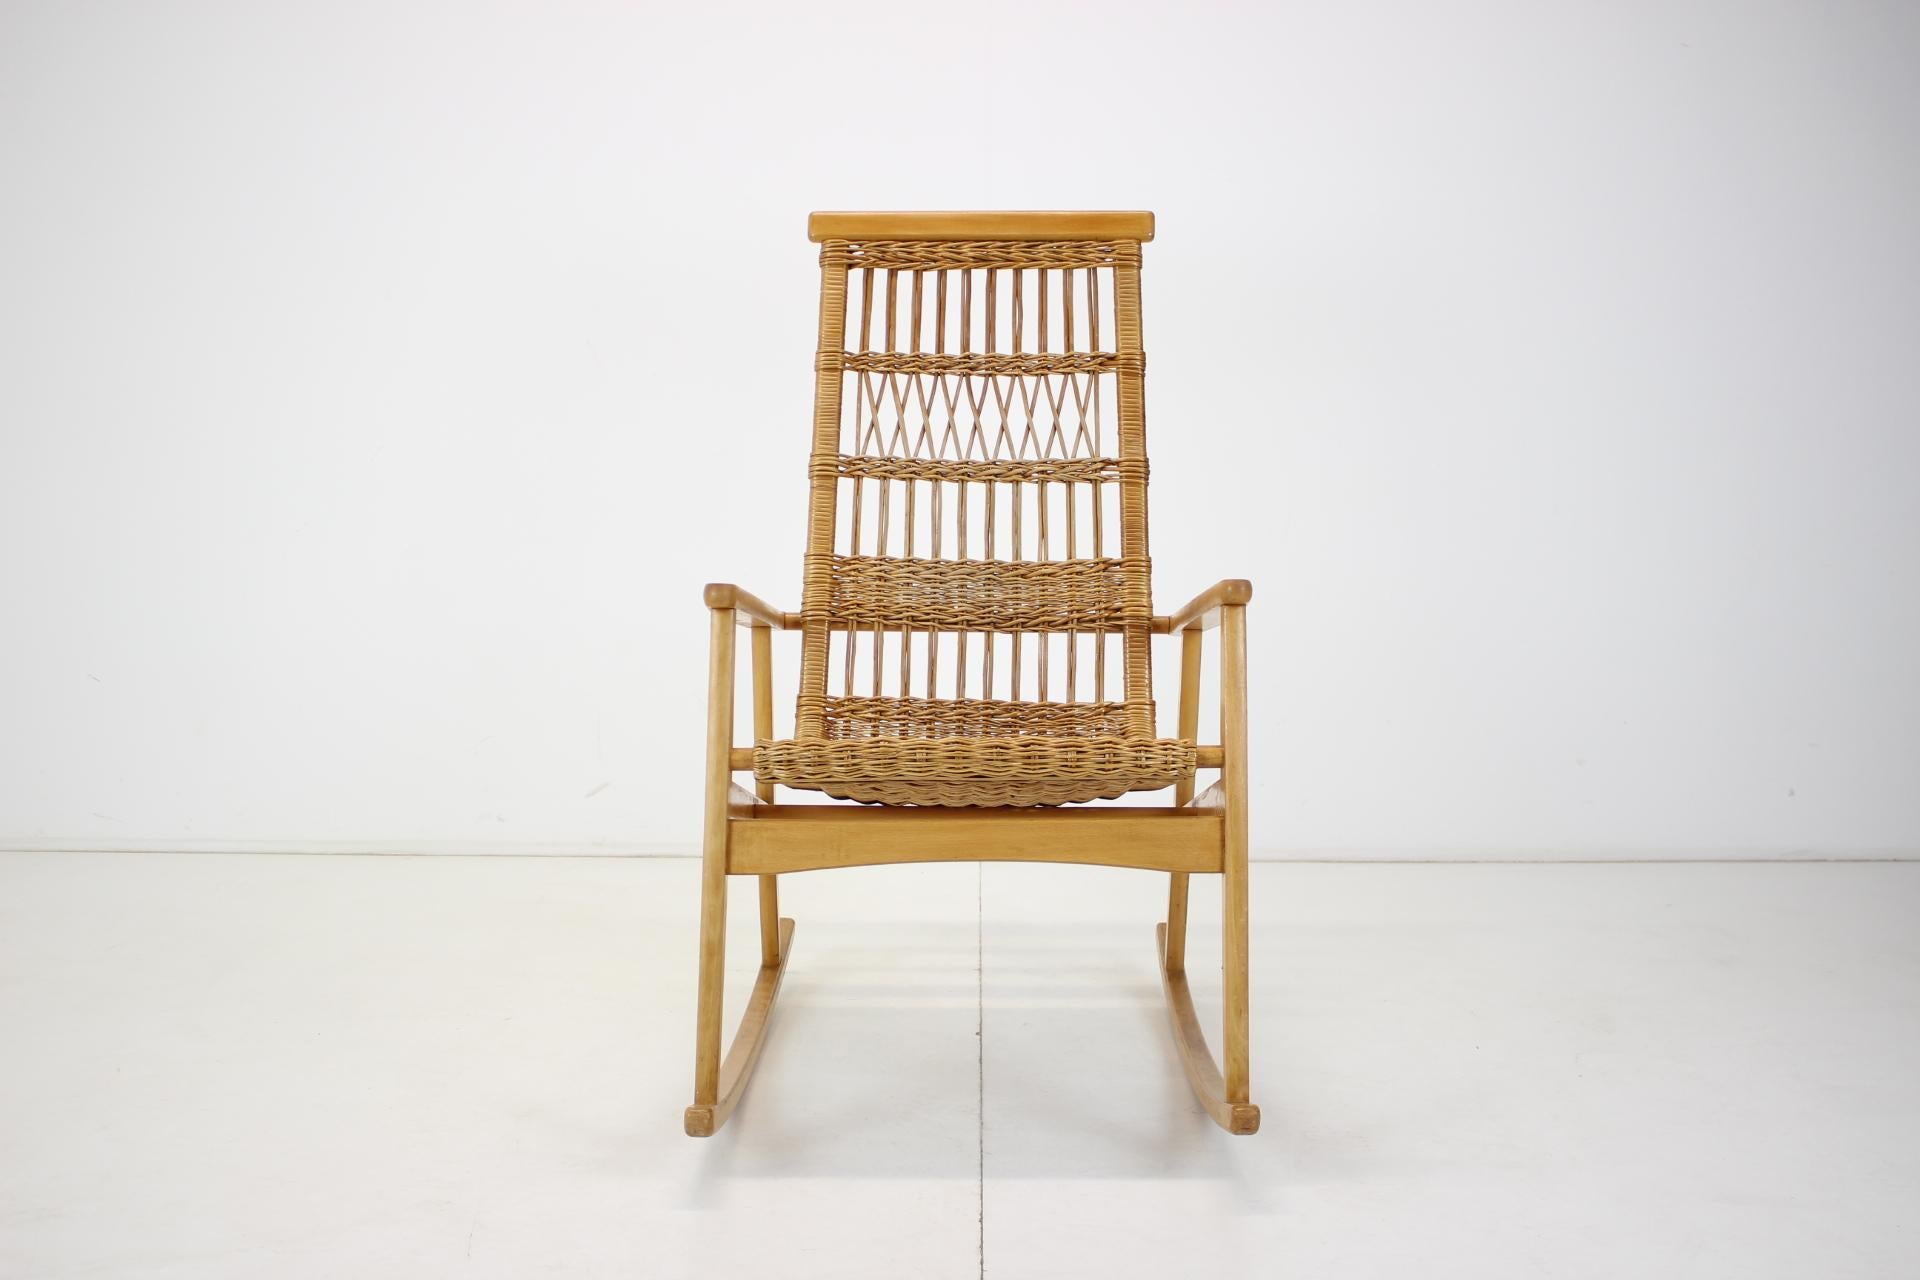 - made in Czechoslovakia
- made of rattan
- good original condition.